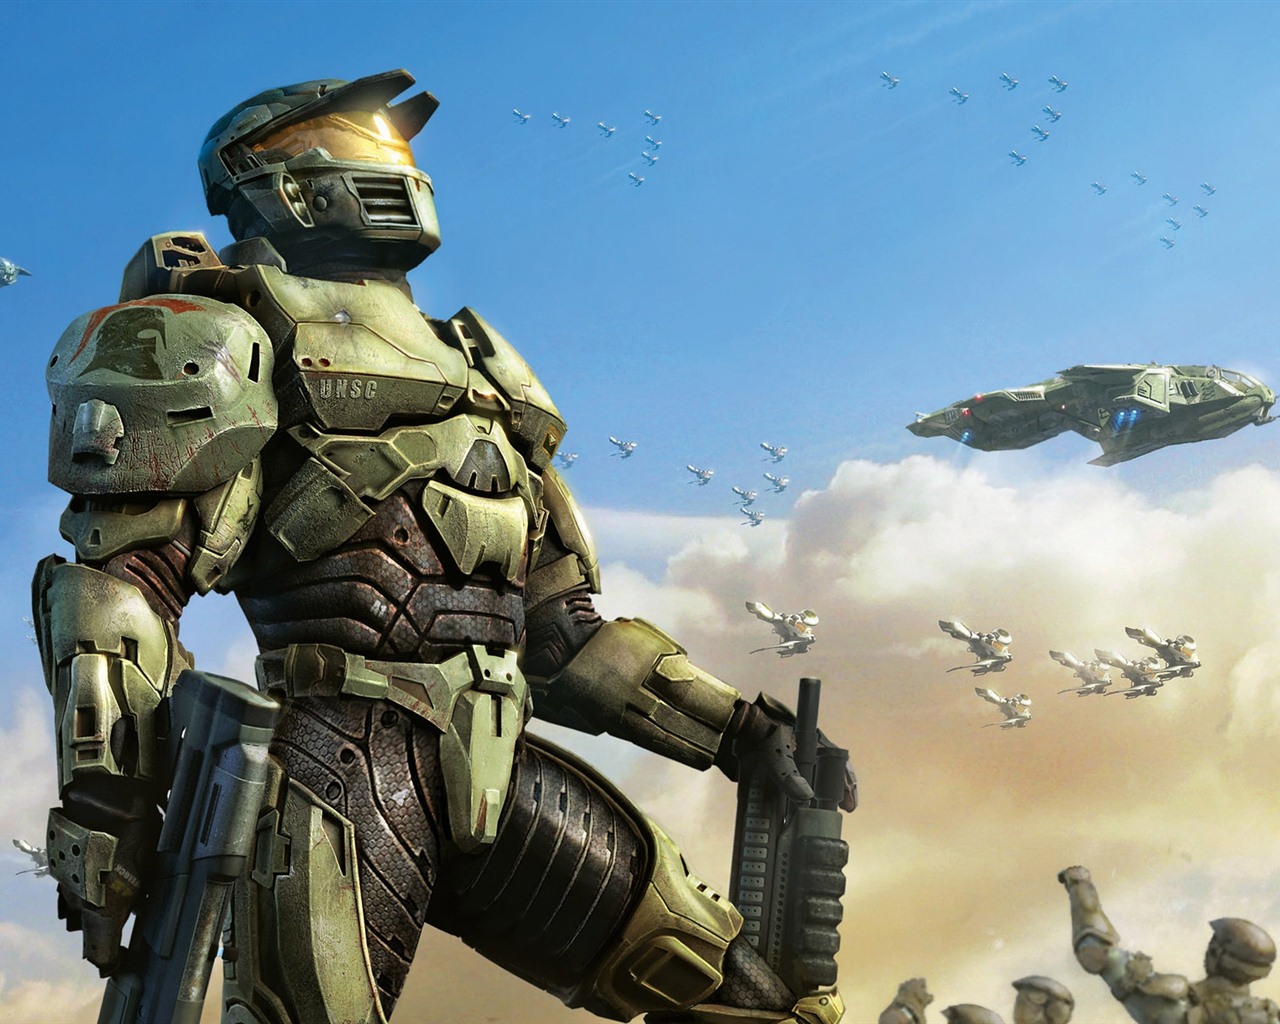 Halo game HD wallpapers #3 - 1280x1024